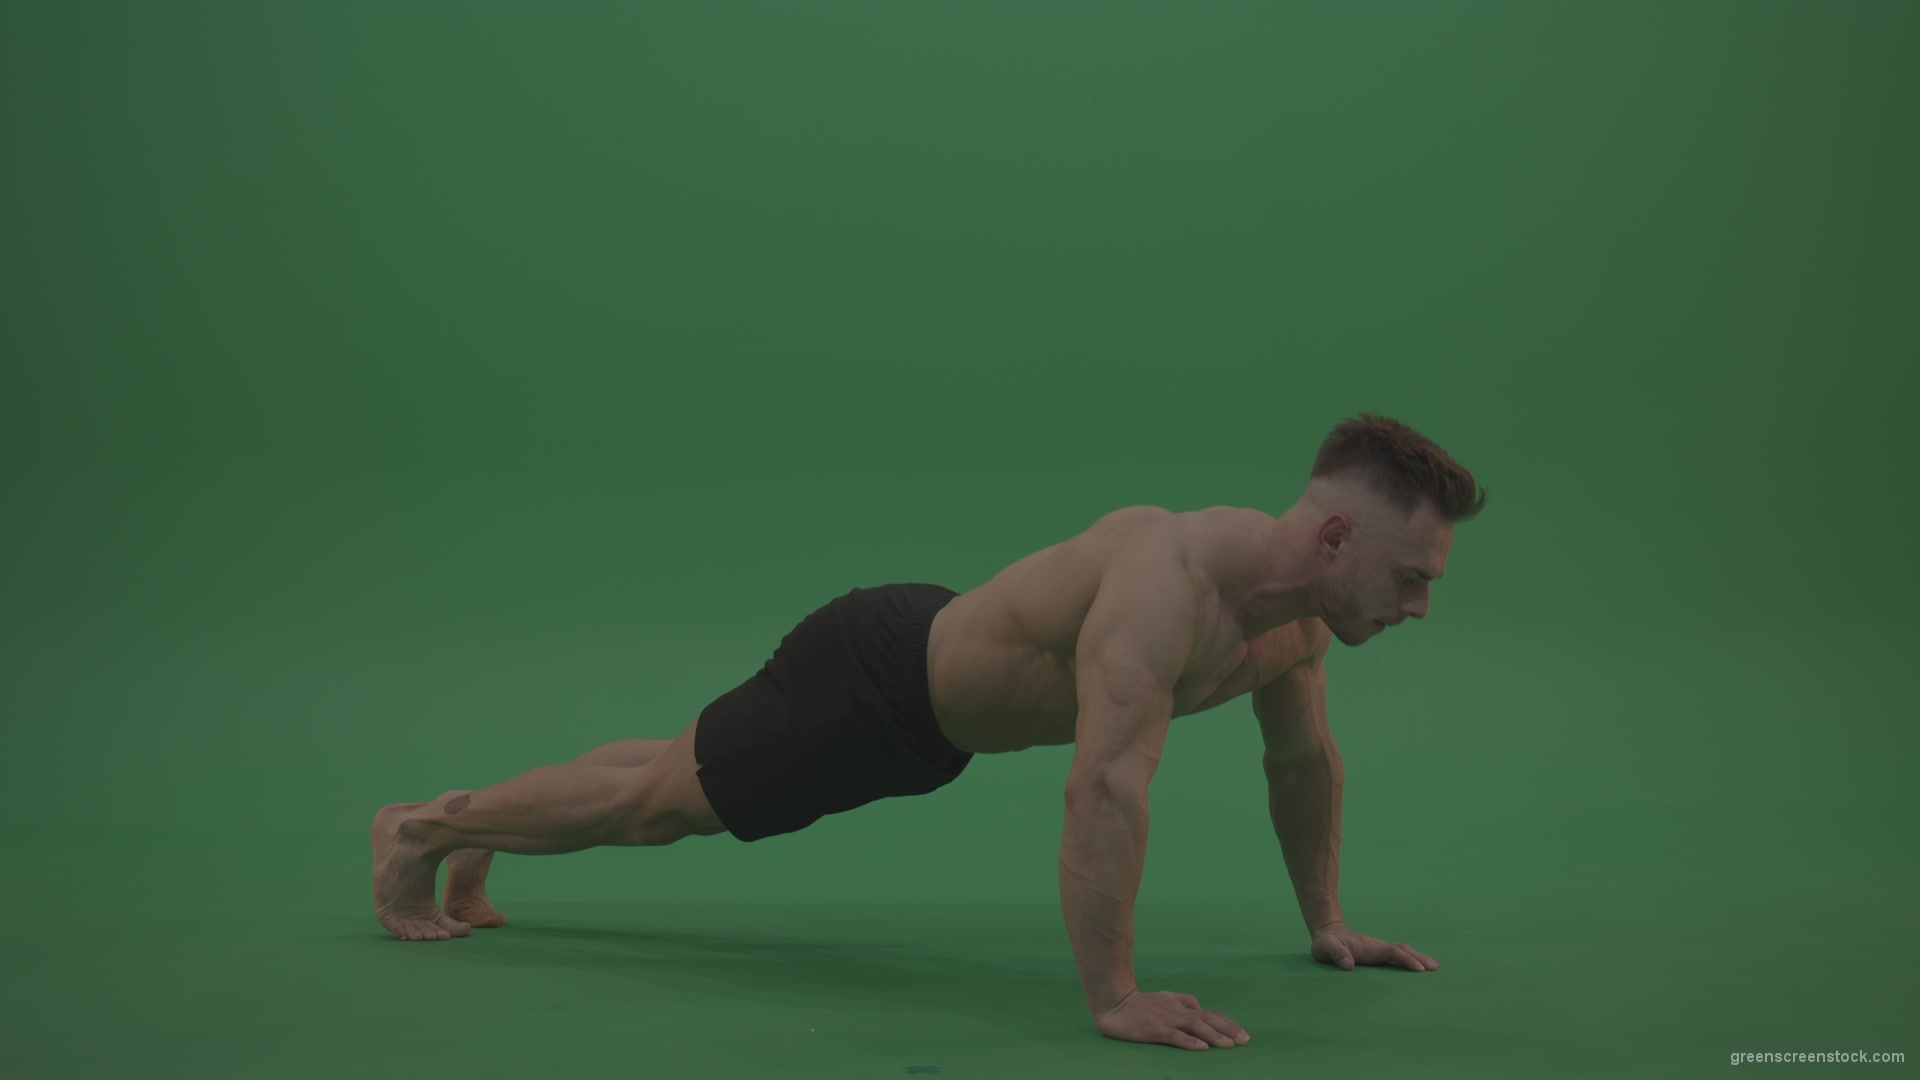 Young_Bodybuilder_Showing_Pull_Ups_Technique_For_Great_Pectoral_Muscles_Excercising_On_Green_Screen_Wall_Background_006 Green Screen Stock